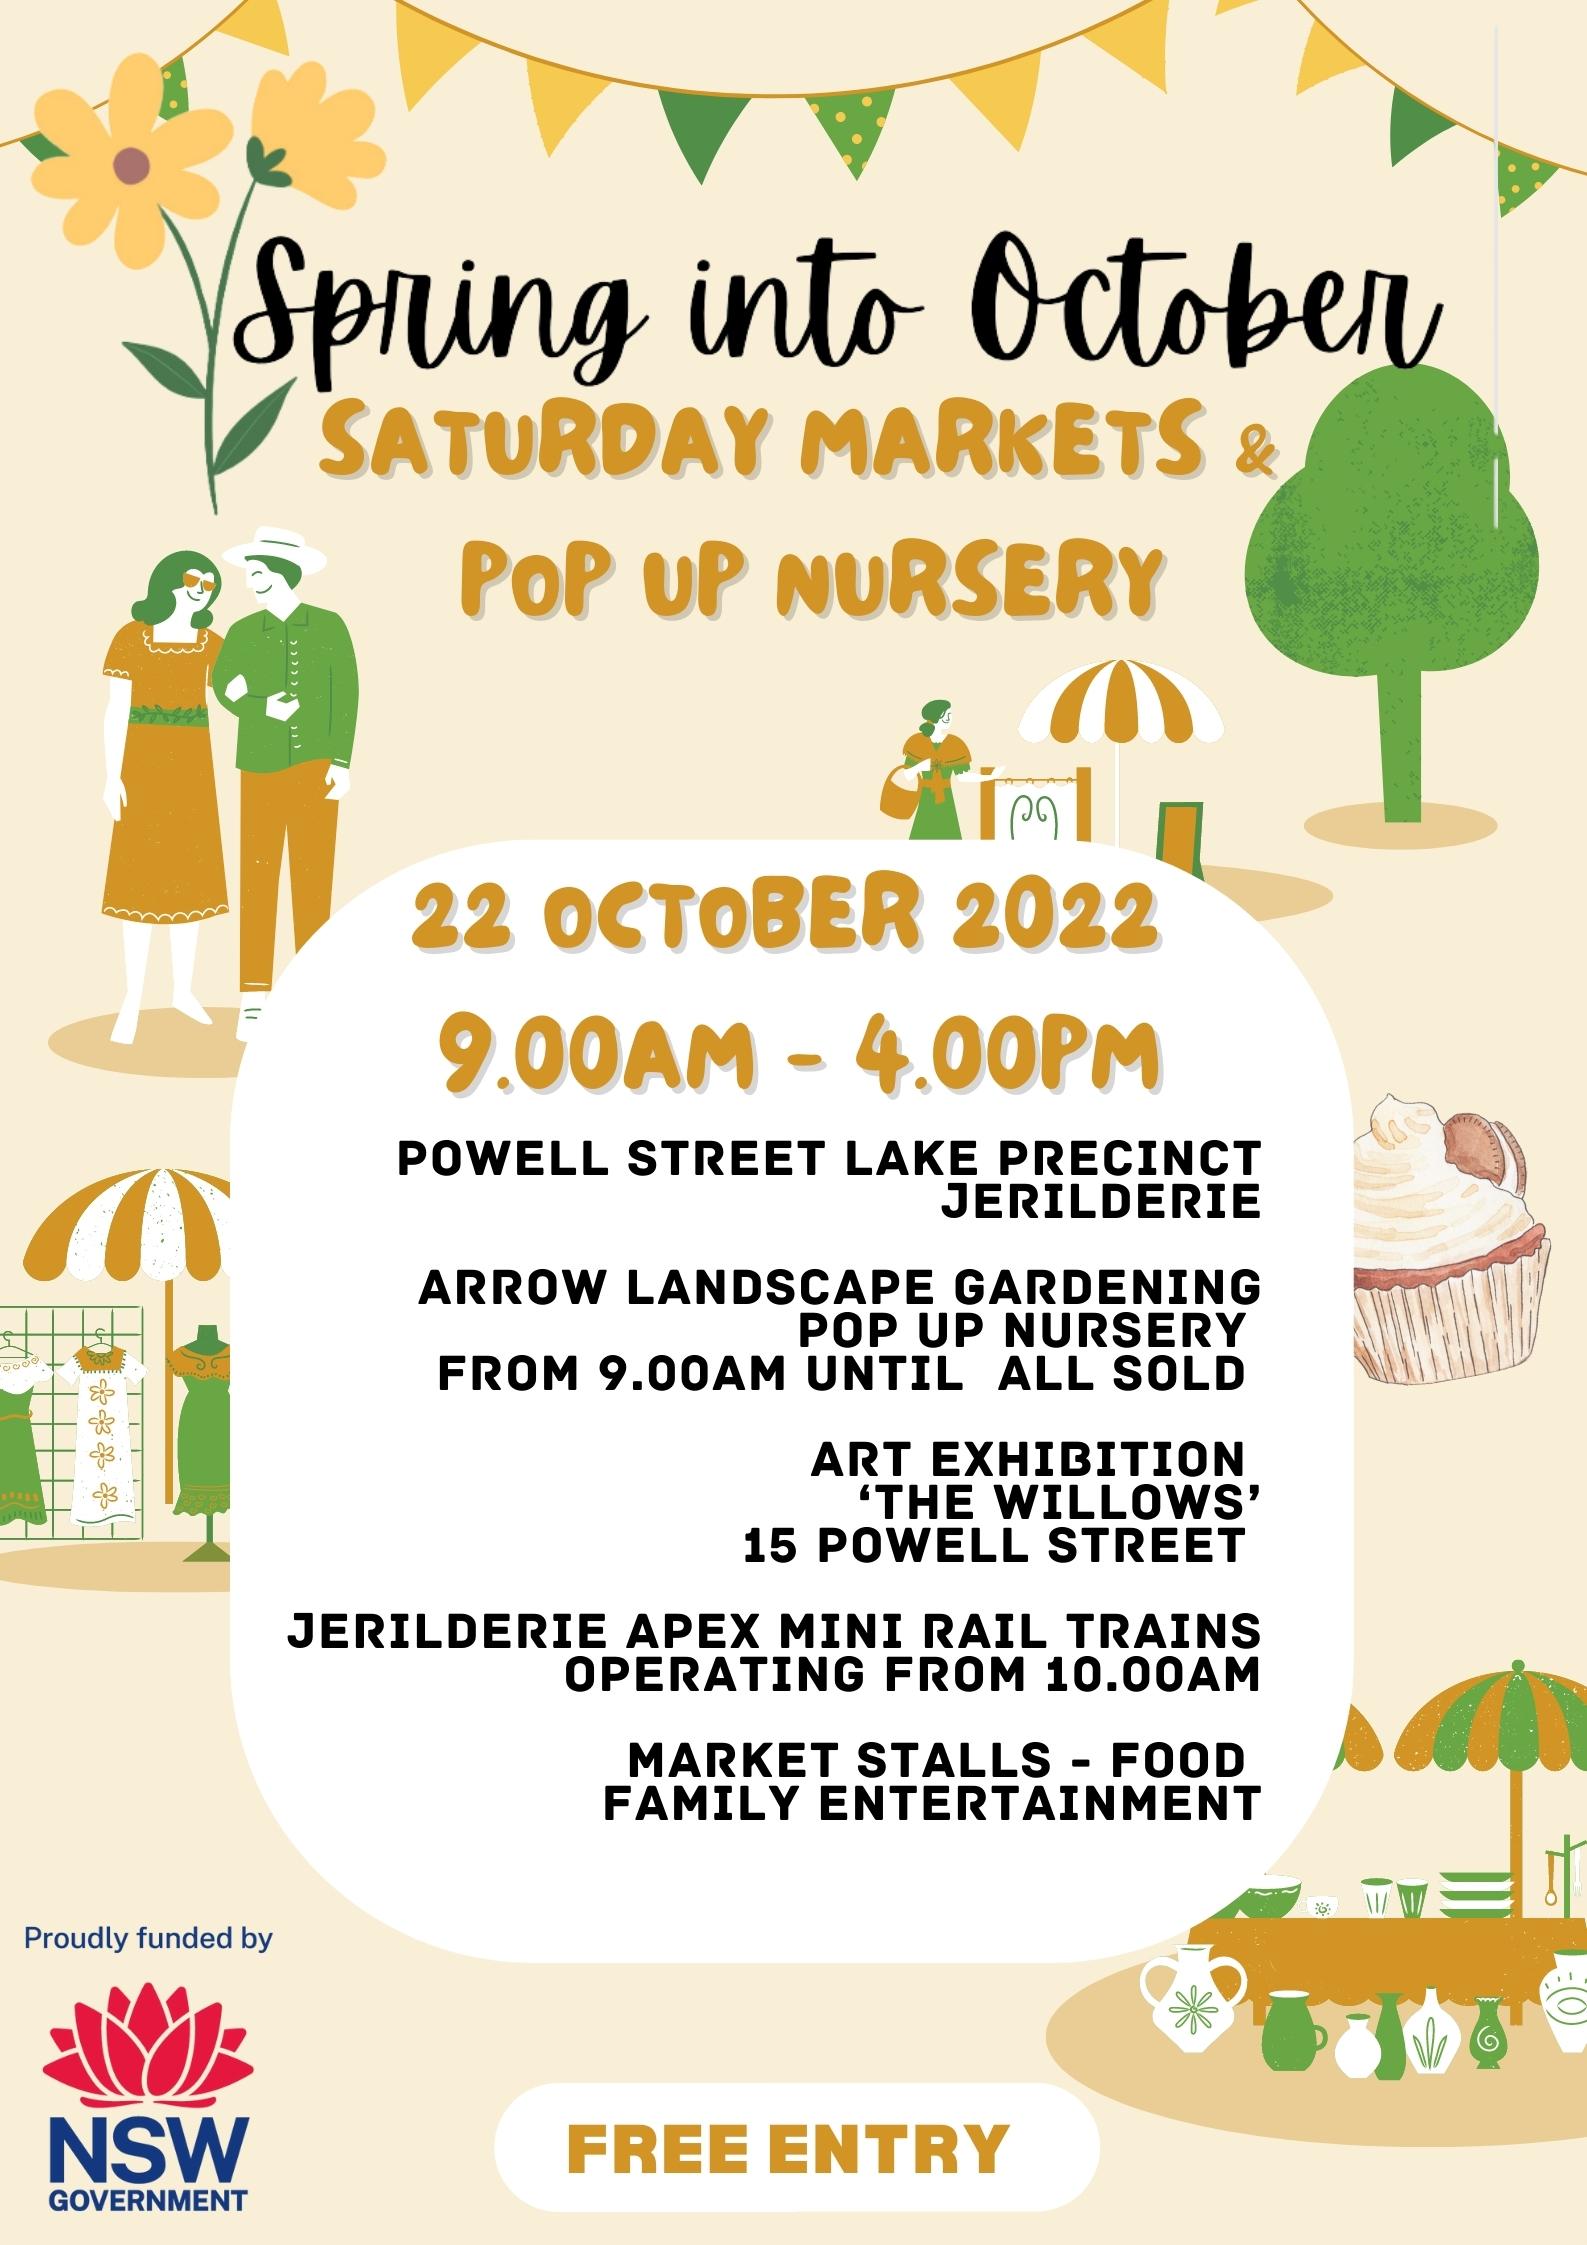 Spring into October - Pop up Nursery and Community Markets